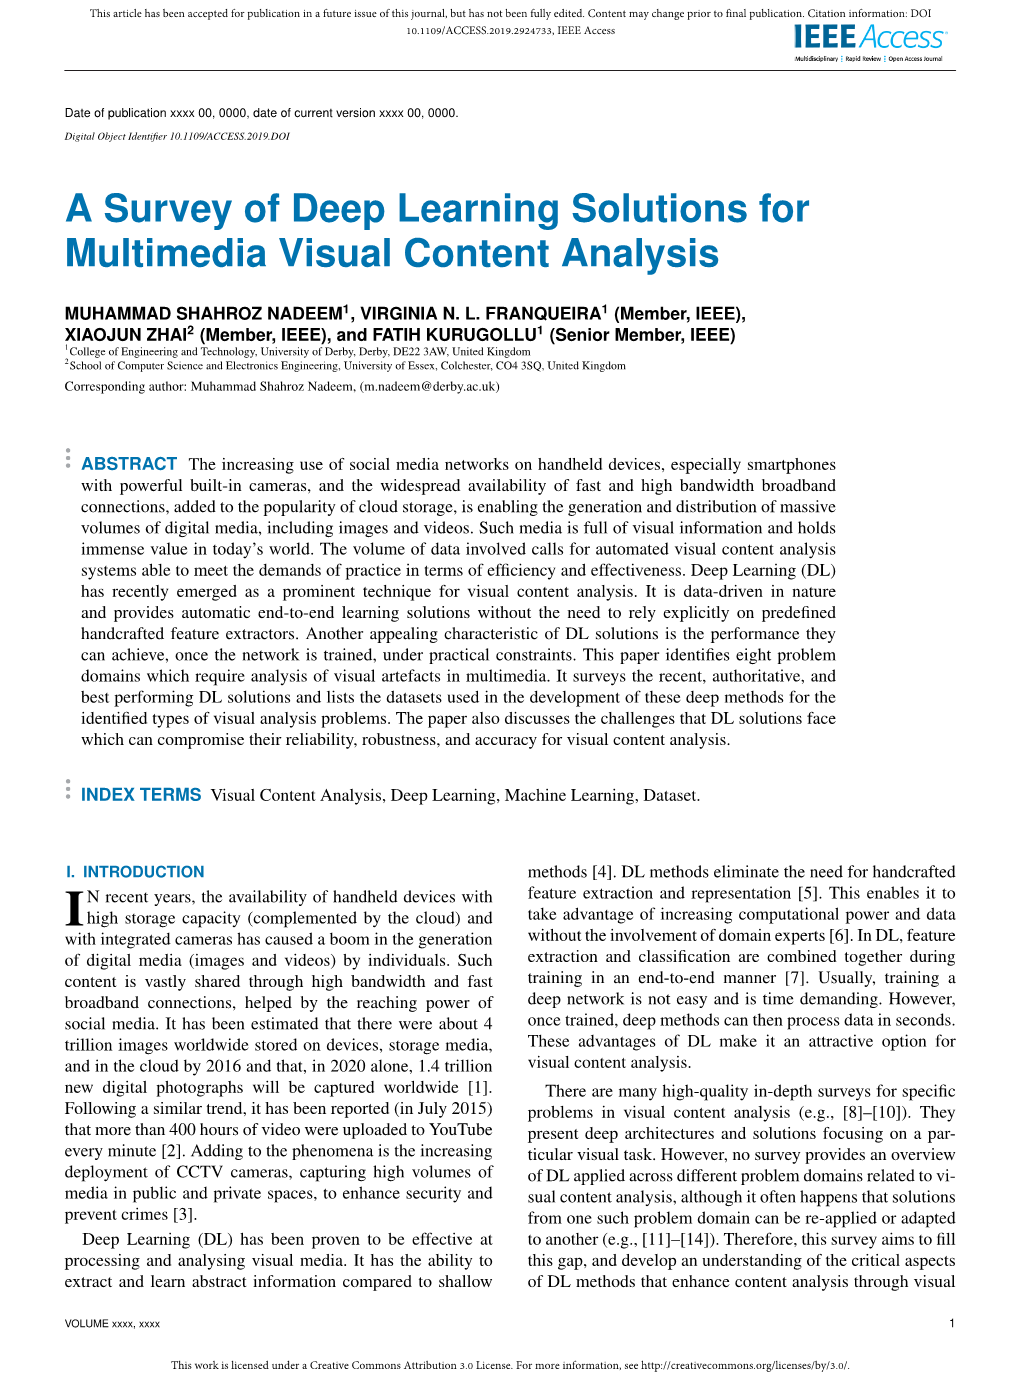 A Survey of Deep Learning Solutions for Multimedia Visual Content Analysis